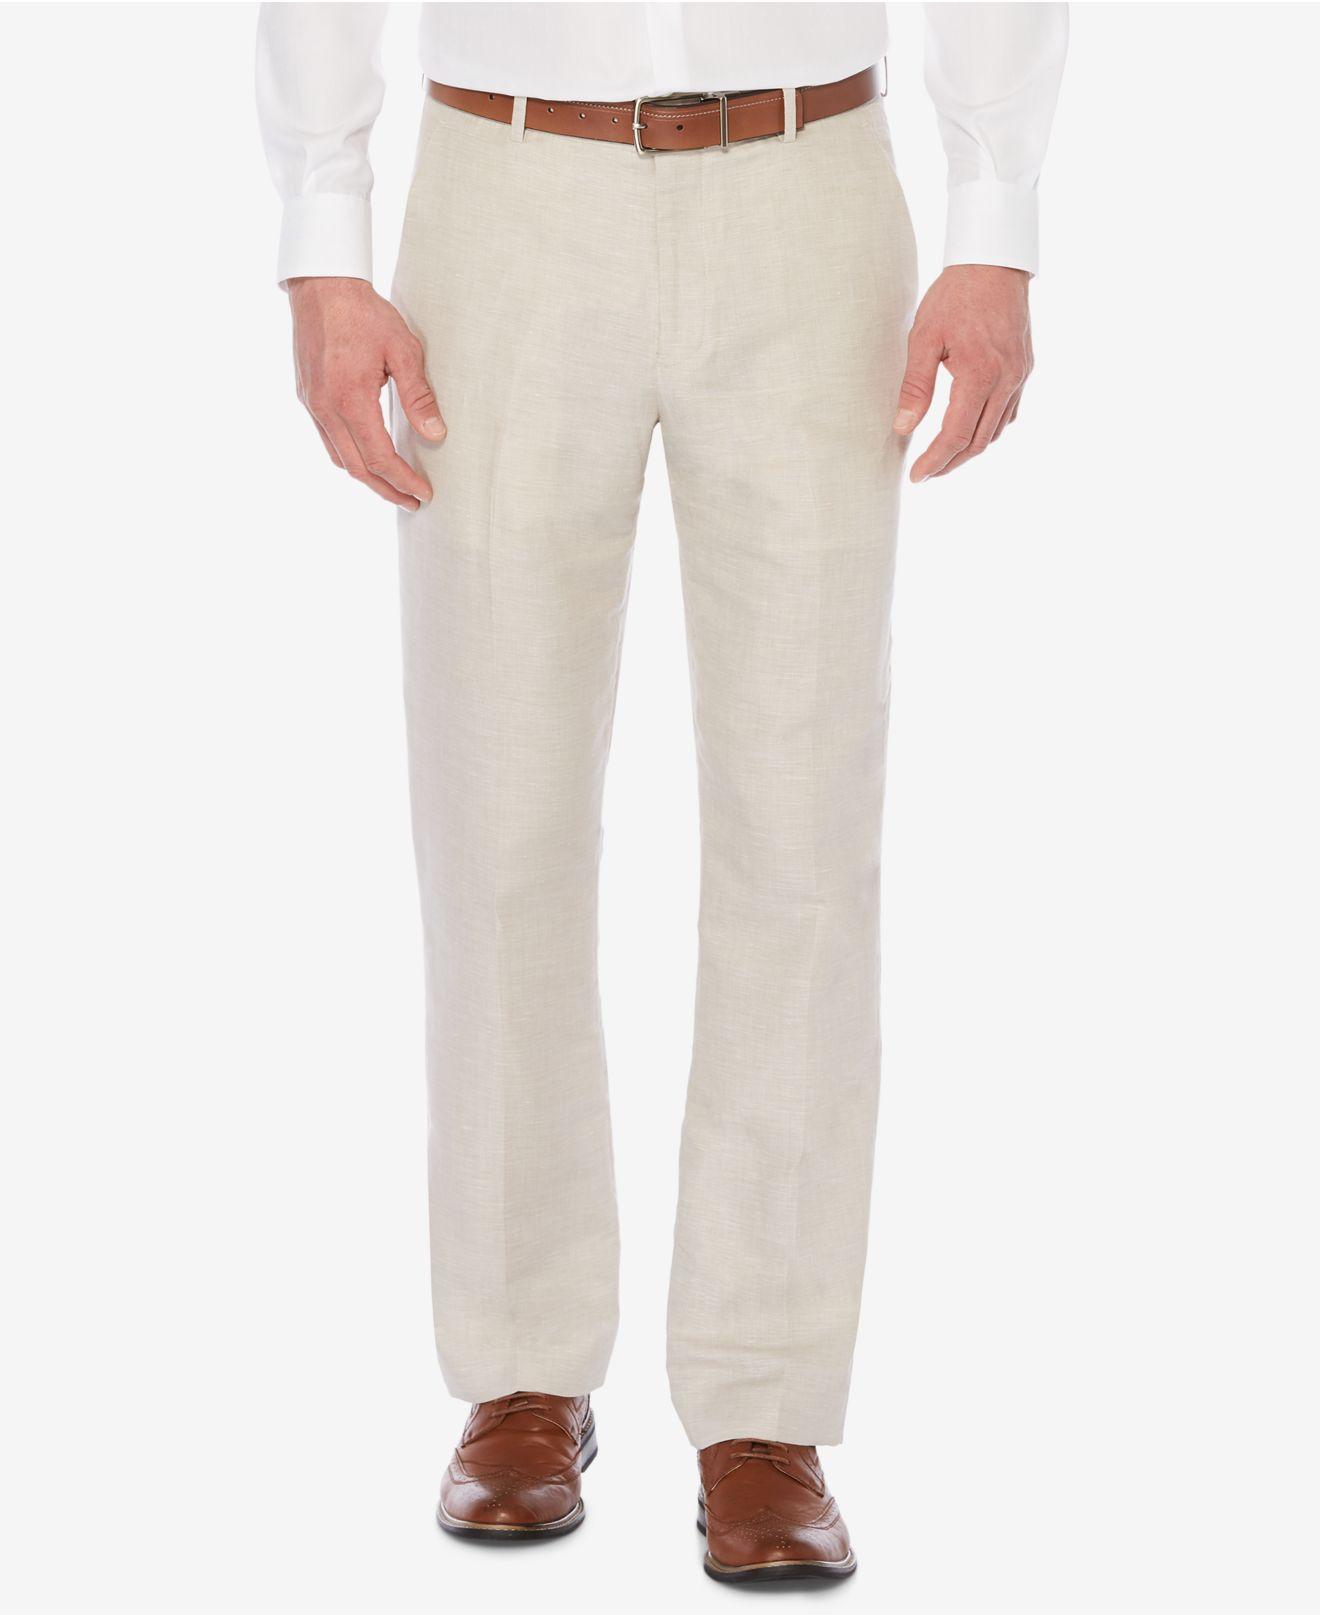 Perry Ellis Big & Tall Linen Pants in Natural for Men - Save 53% - Lyst